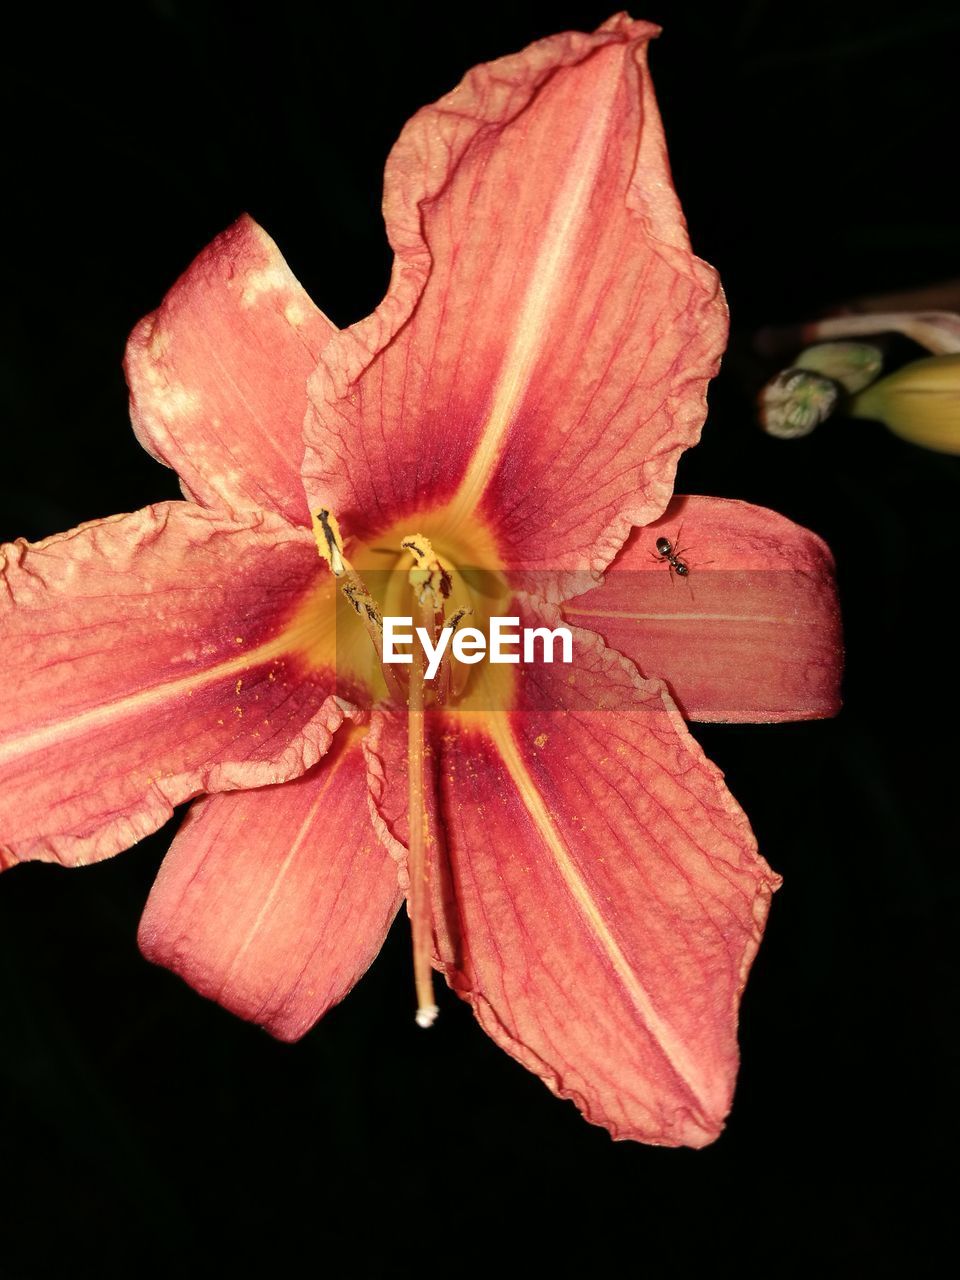 CLOSE-UP OF DAY LILY BLOOMING IN BLACK BACKGROUND